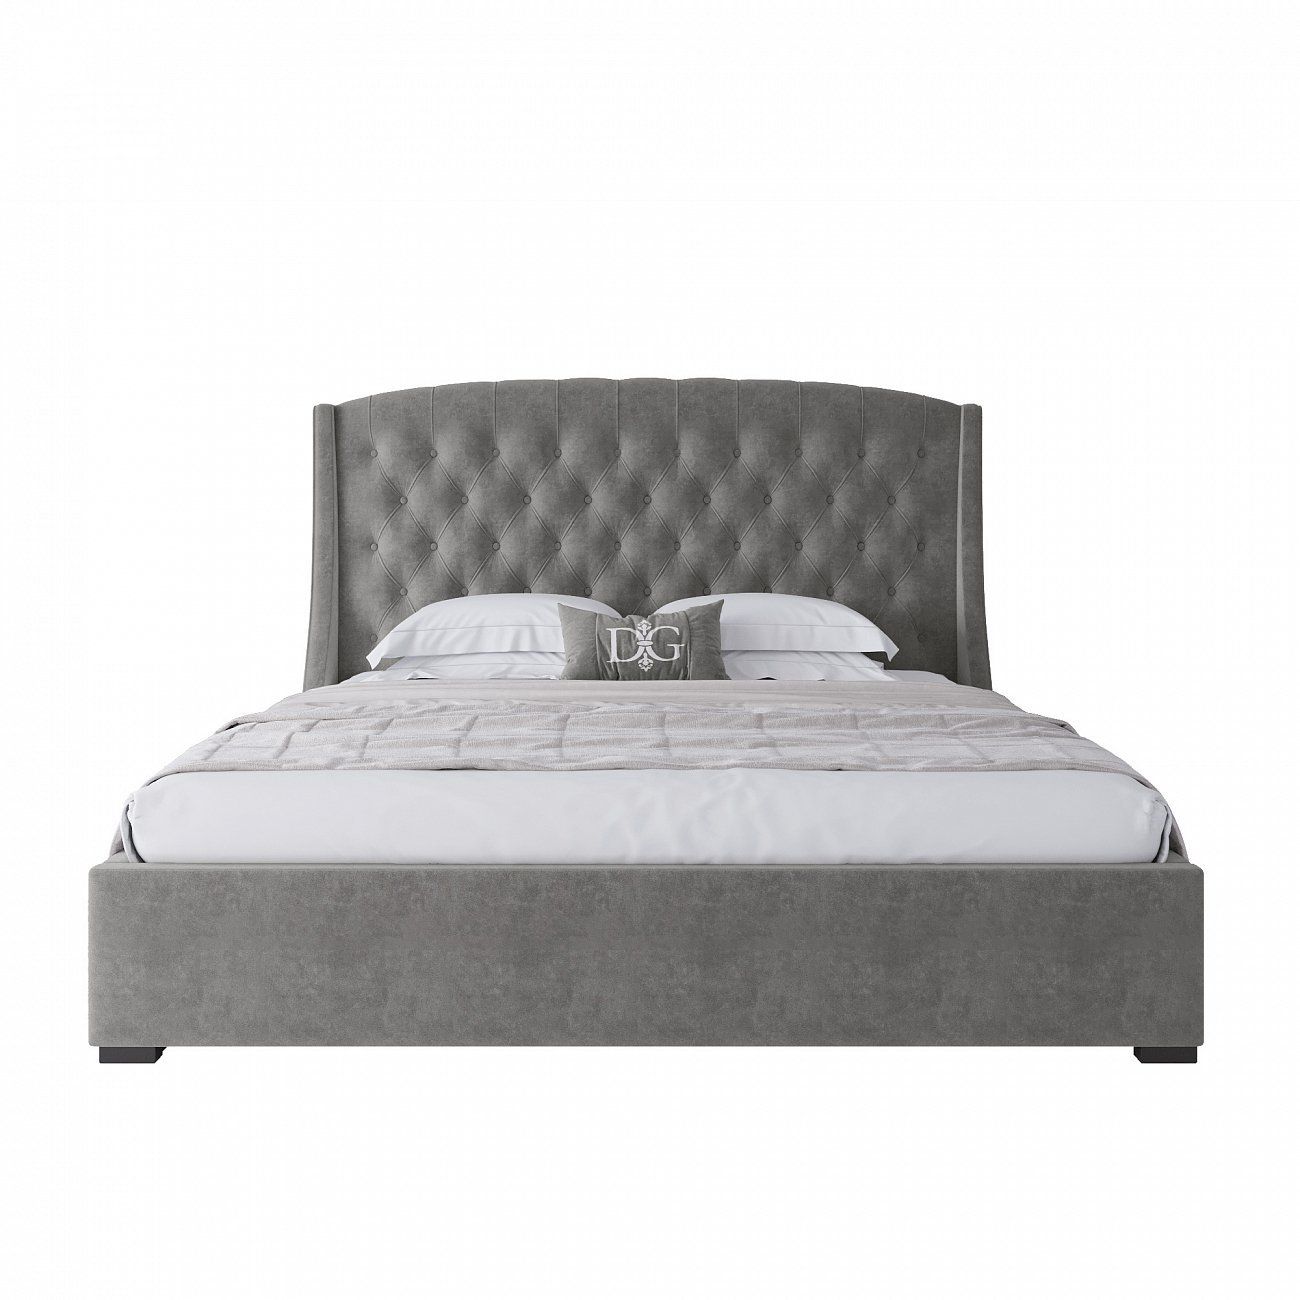 Double bed 180x200 without studs light grey Hugo